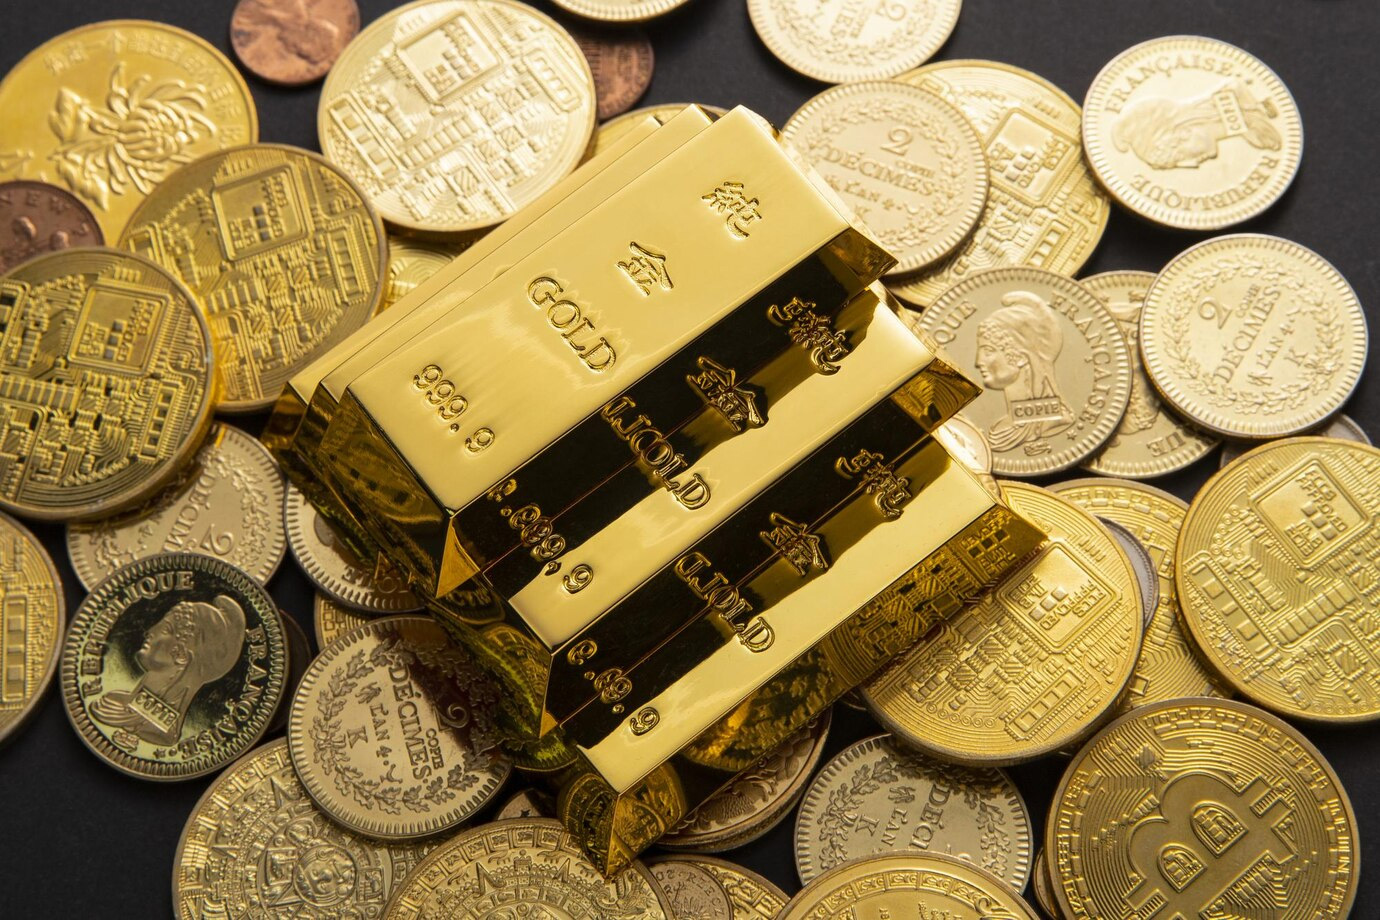 Strategies for Investing in Gold Mining Stocks